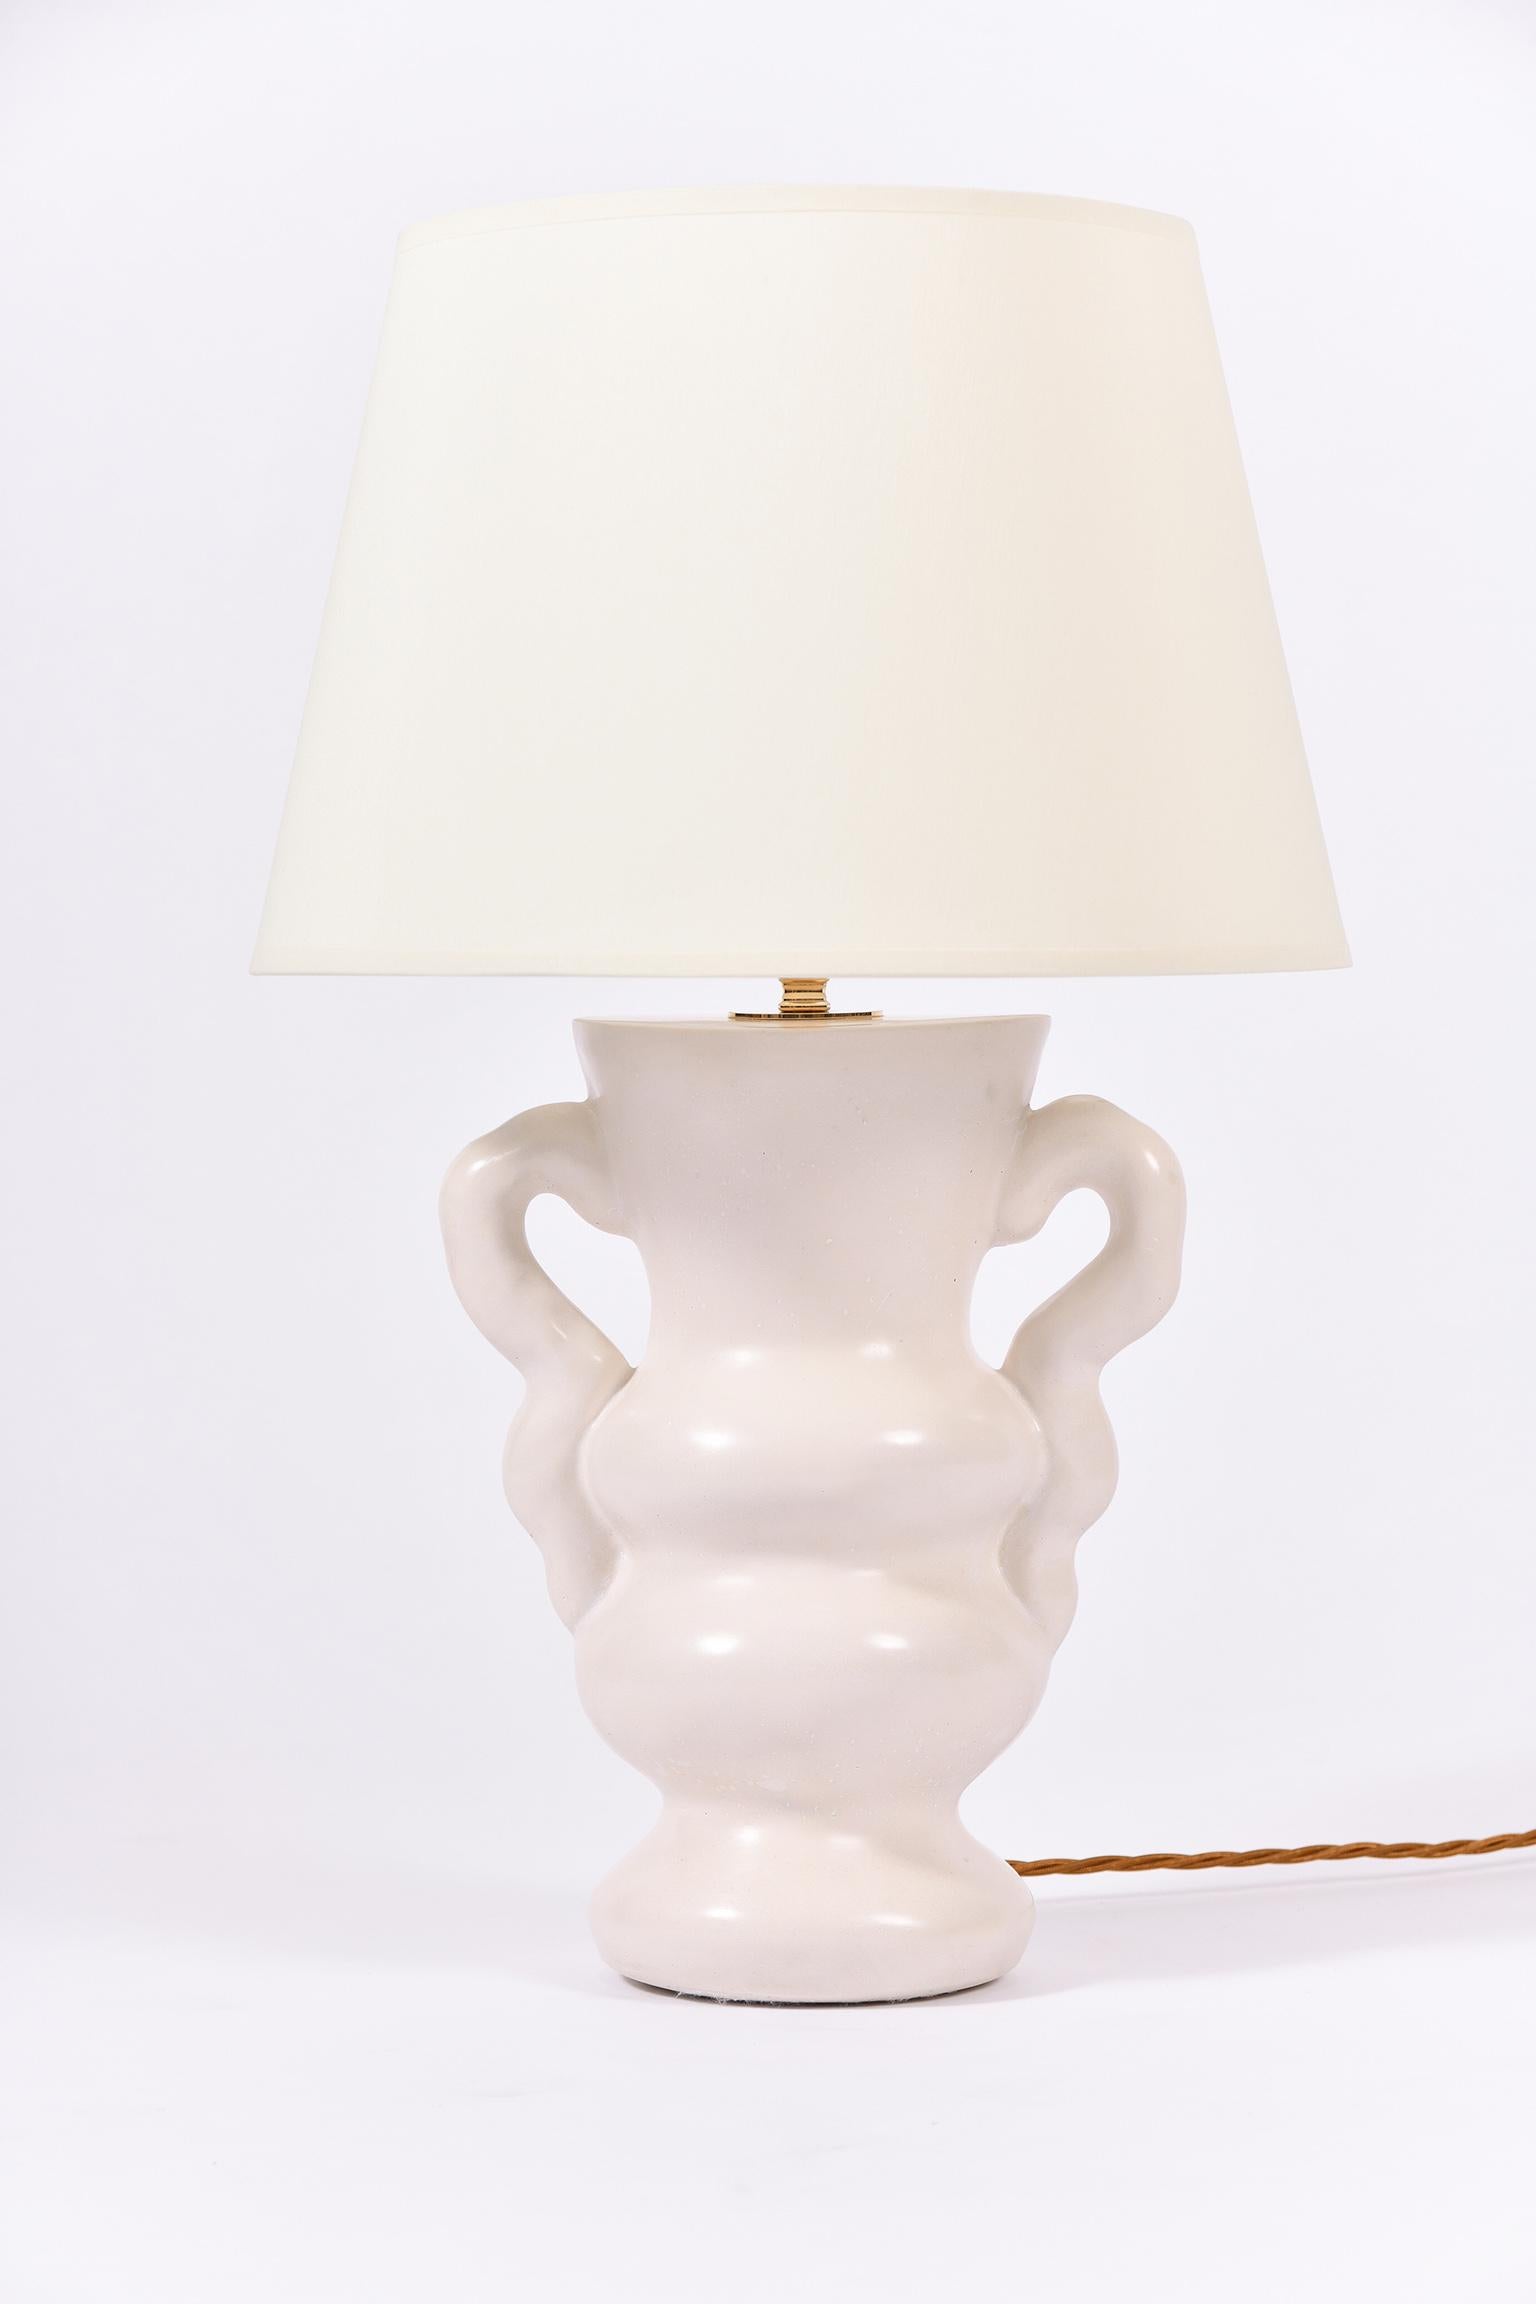 A pair of Ysolde table lamps, by Dorian Caffot de Fawes
Hand cast in London, polished and waxed high quality plaster
With a bespoke ivory fabric tapered shade.
With the shade: 57 cm high 36 cm diameter
Lamp base only: 36 cm high by 25 cm wide by 16